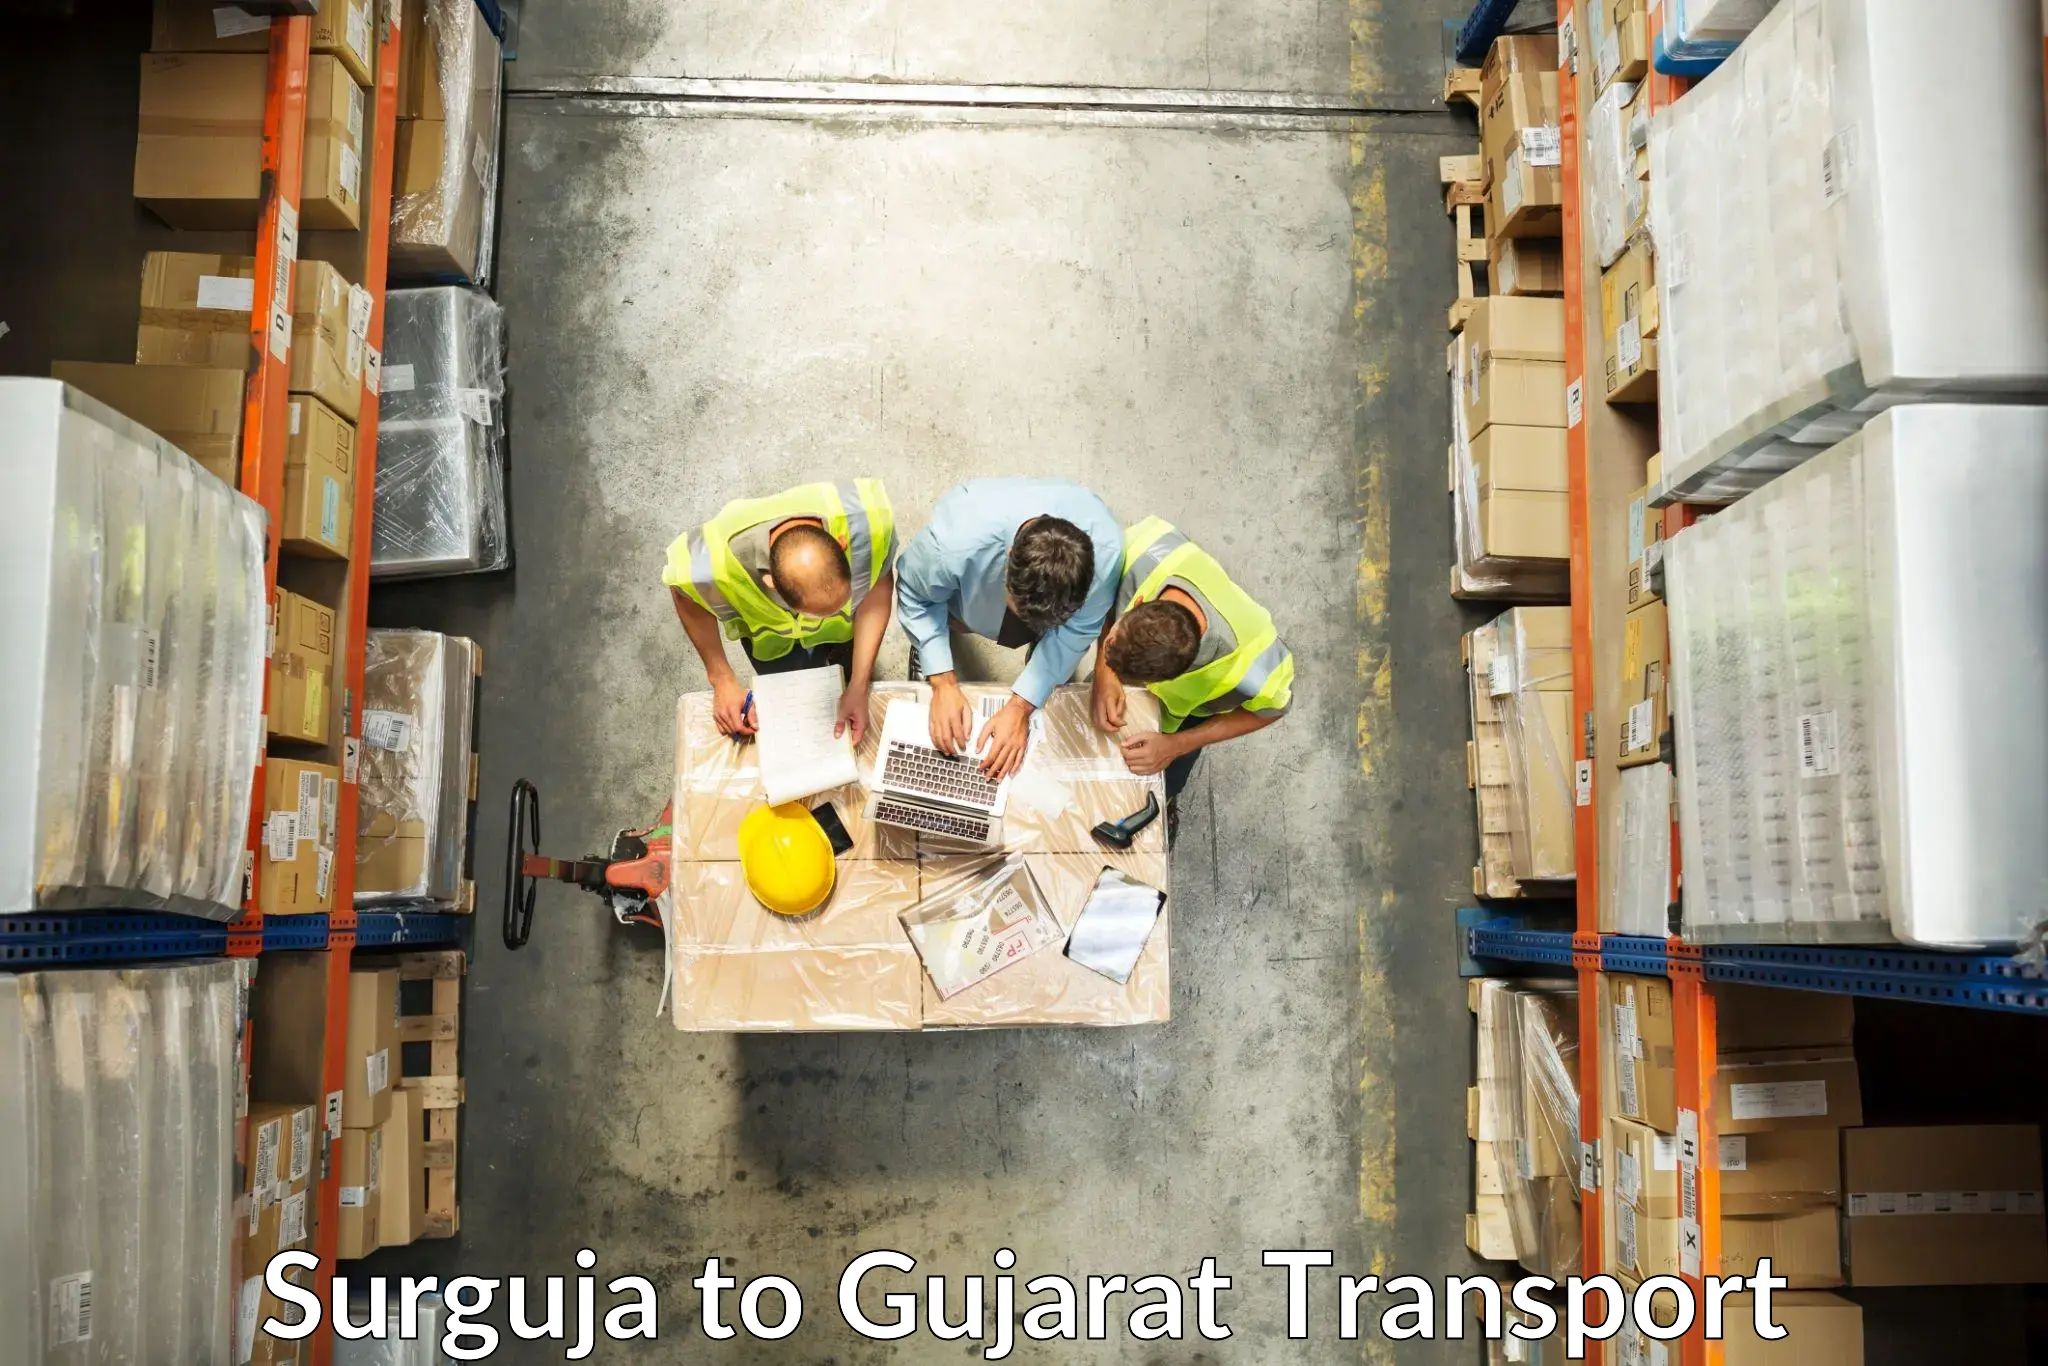 Commercial transport service Surguja to Veraval